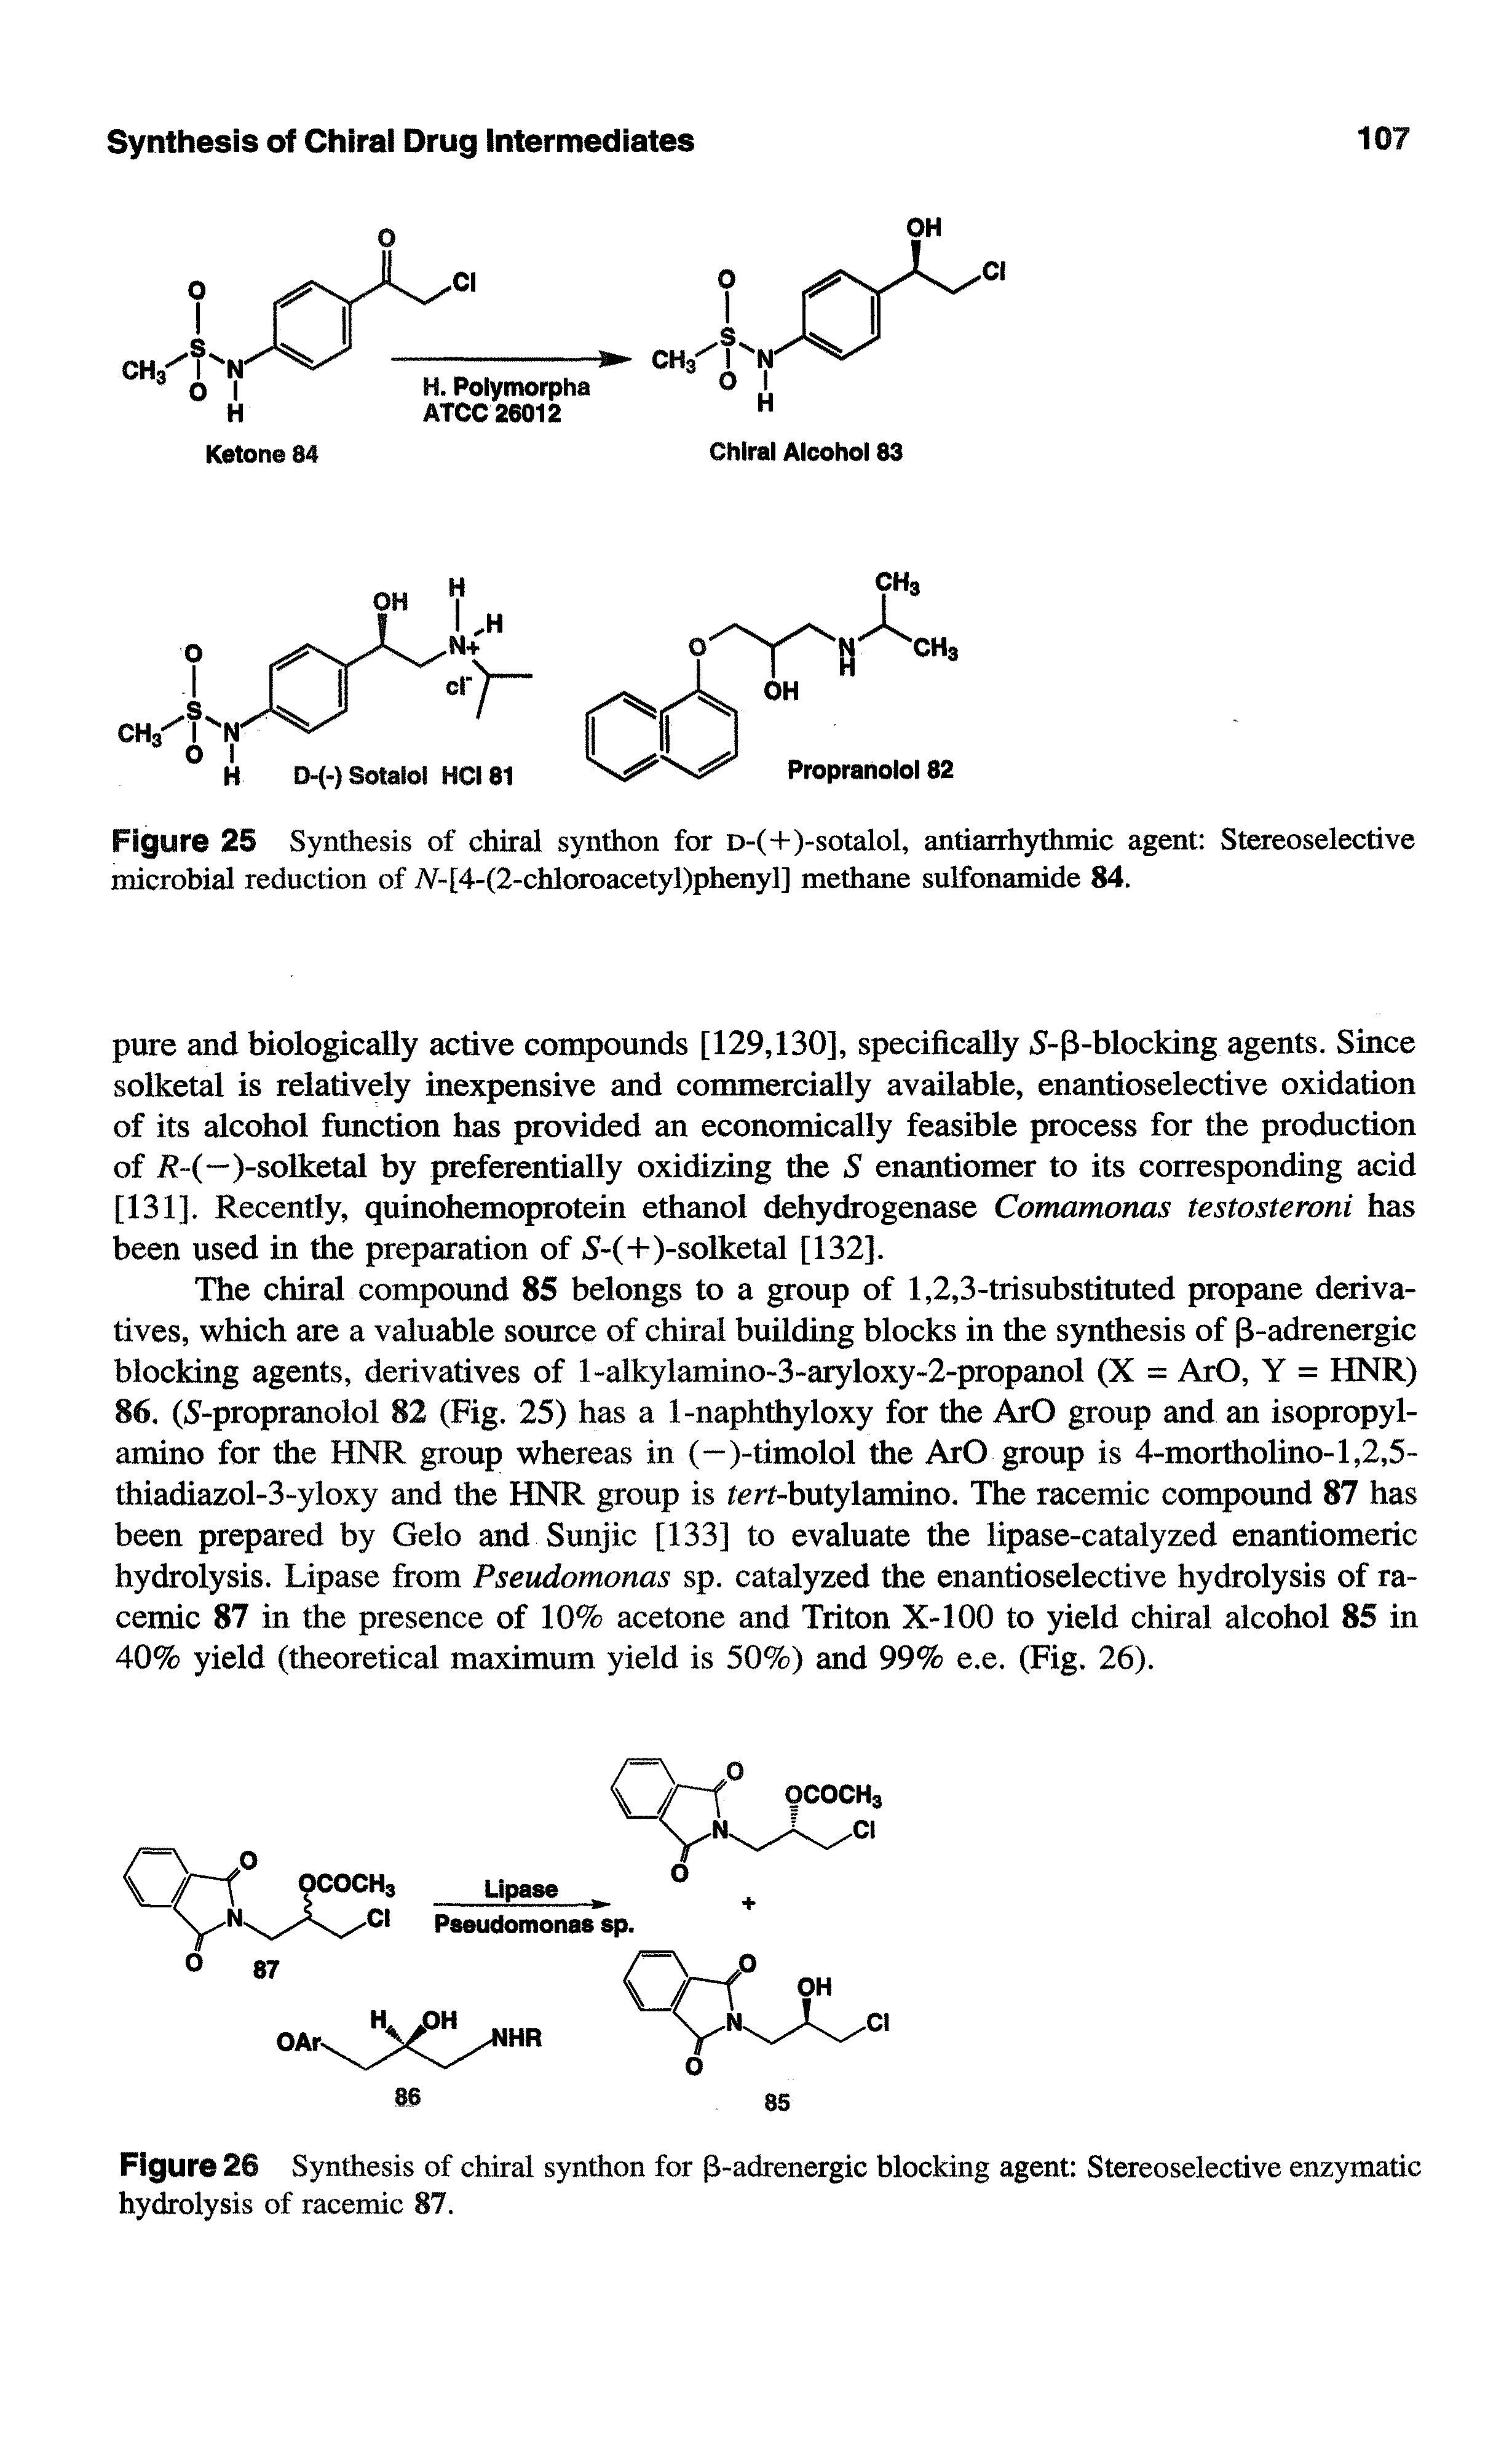 Figure 26 Synthesis of chiral synthon for P-adrenergic blocking agent Stereoselective enzymatic hydrolysis of racemic 87.